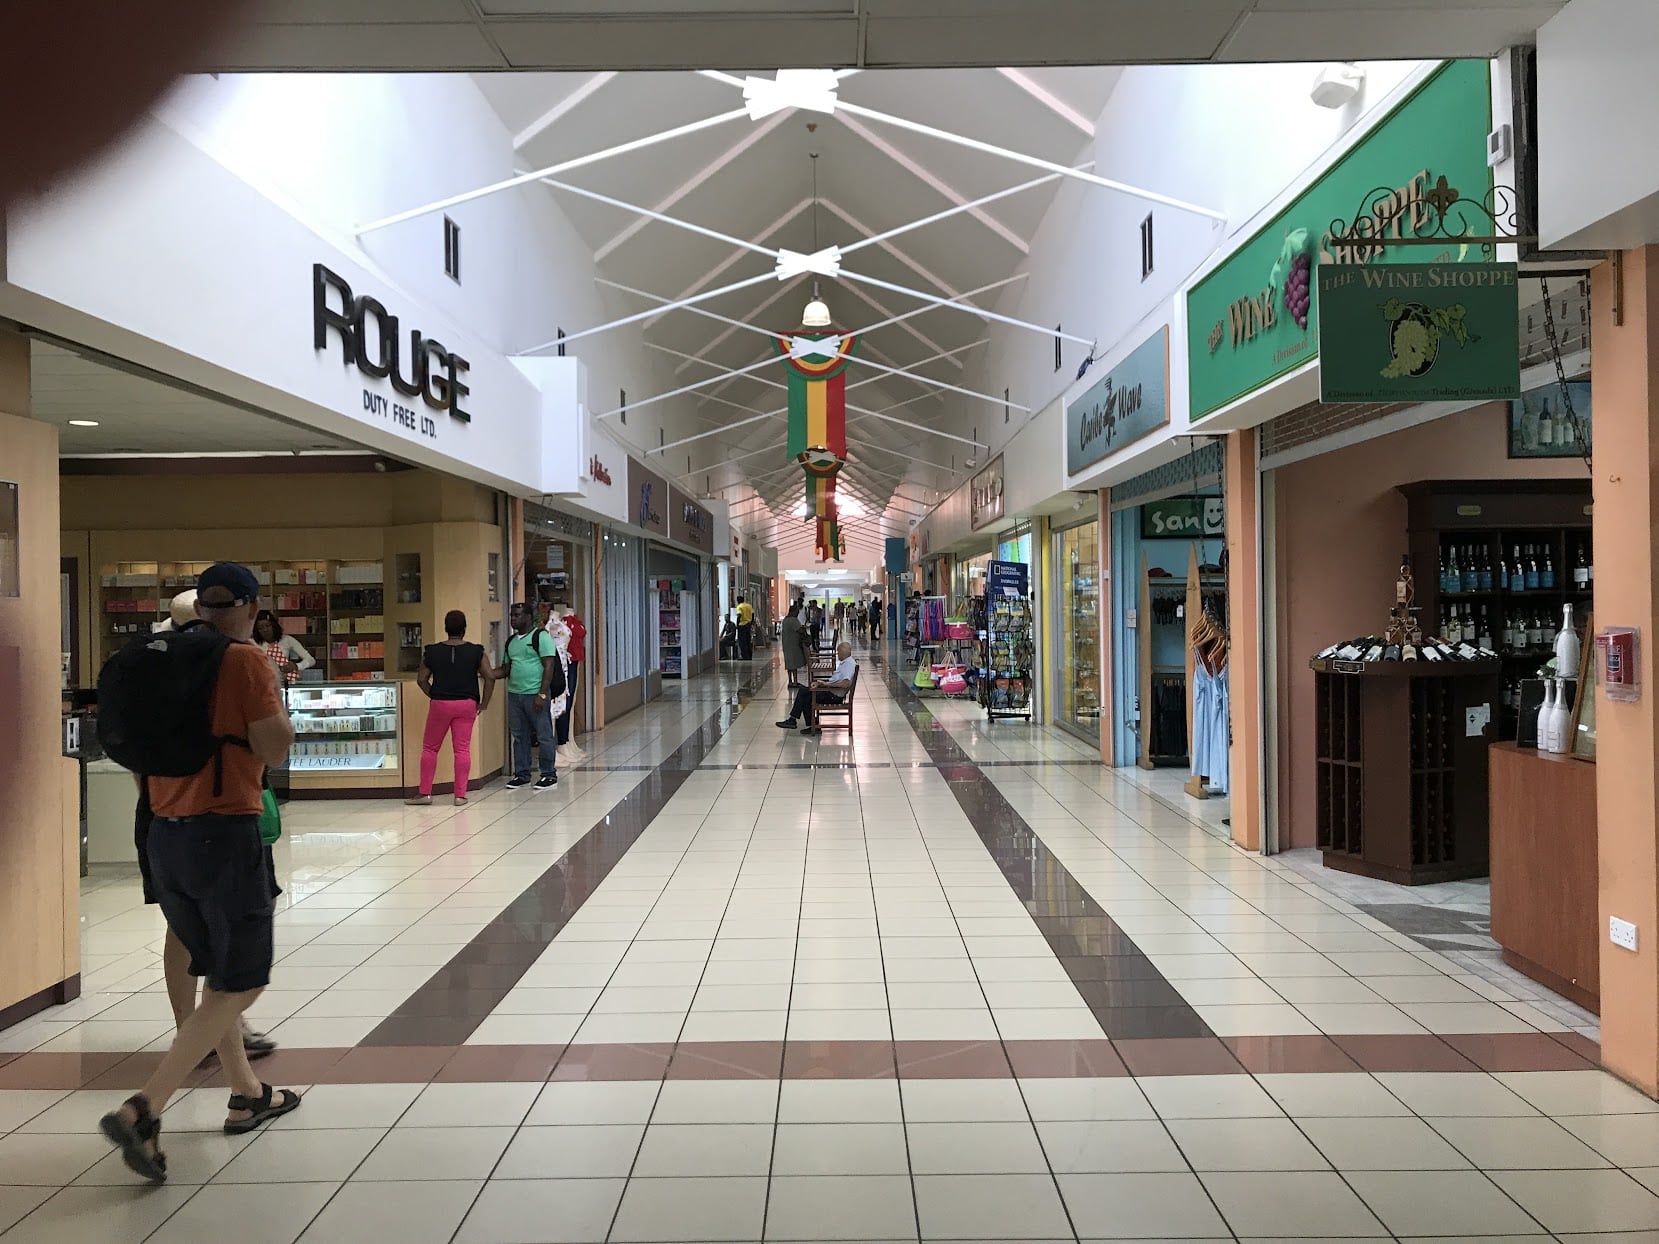 Interior of an indoor shopping mall. A long tiled hallway lined with stores. There are a few people walking down the hall.